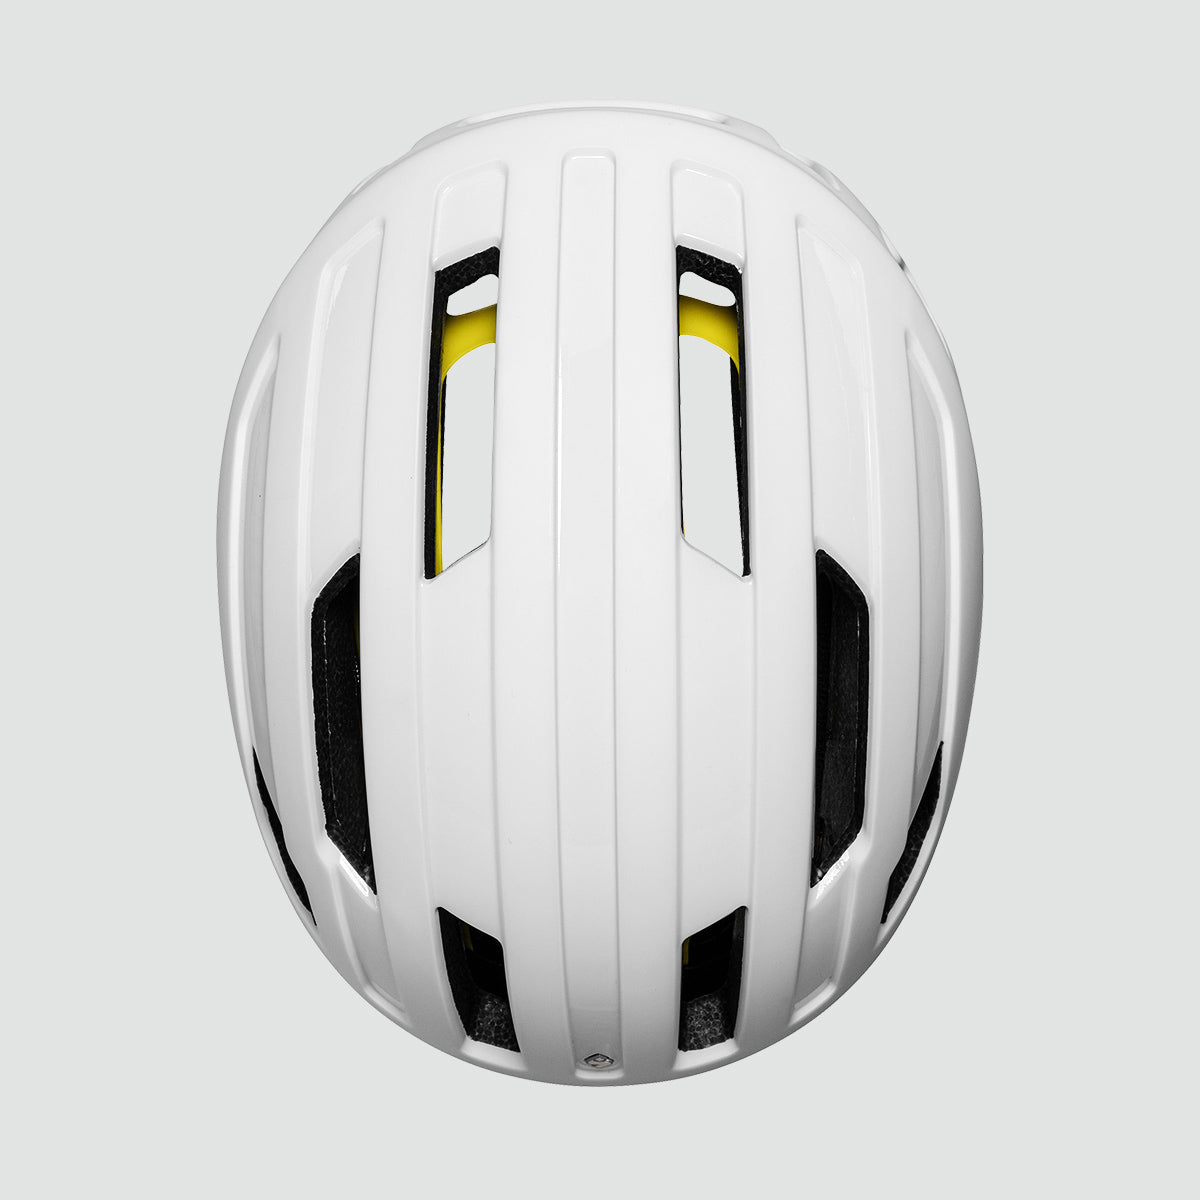 Casque Ourtrider MIPS - Blanc mat